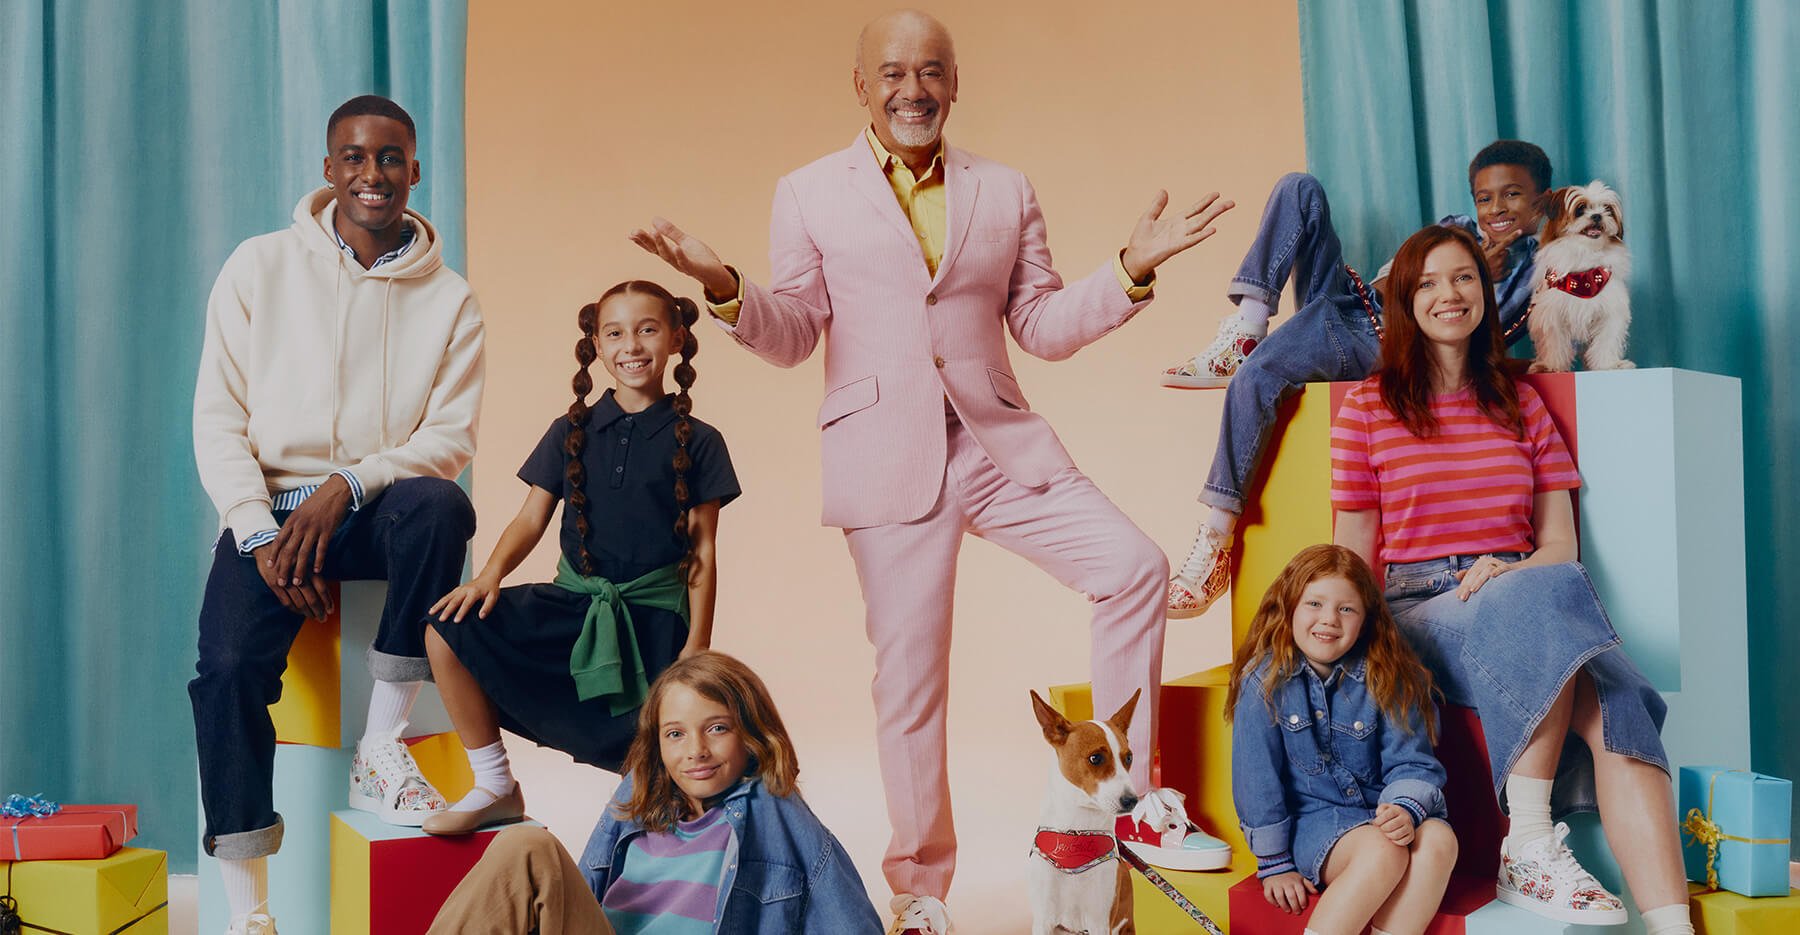 Christian Louboutin Kits Out The Whole House With The LoubiFamily  Collection - 10 Magazine USA